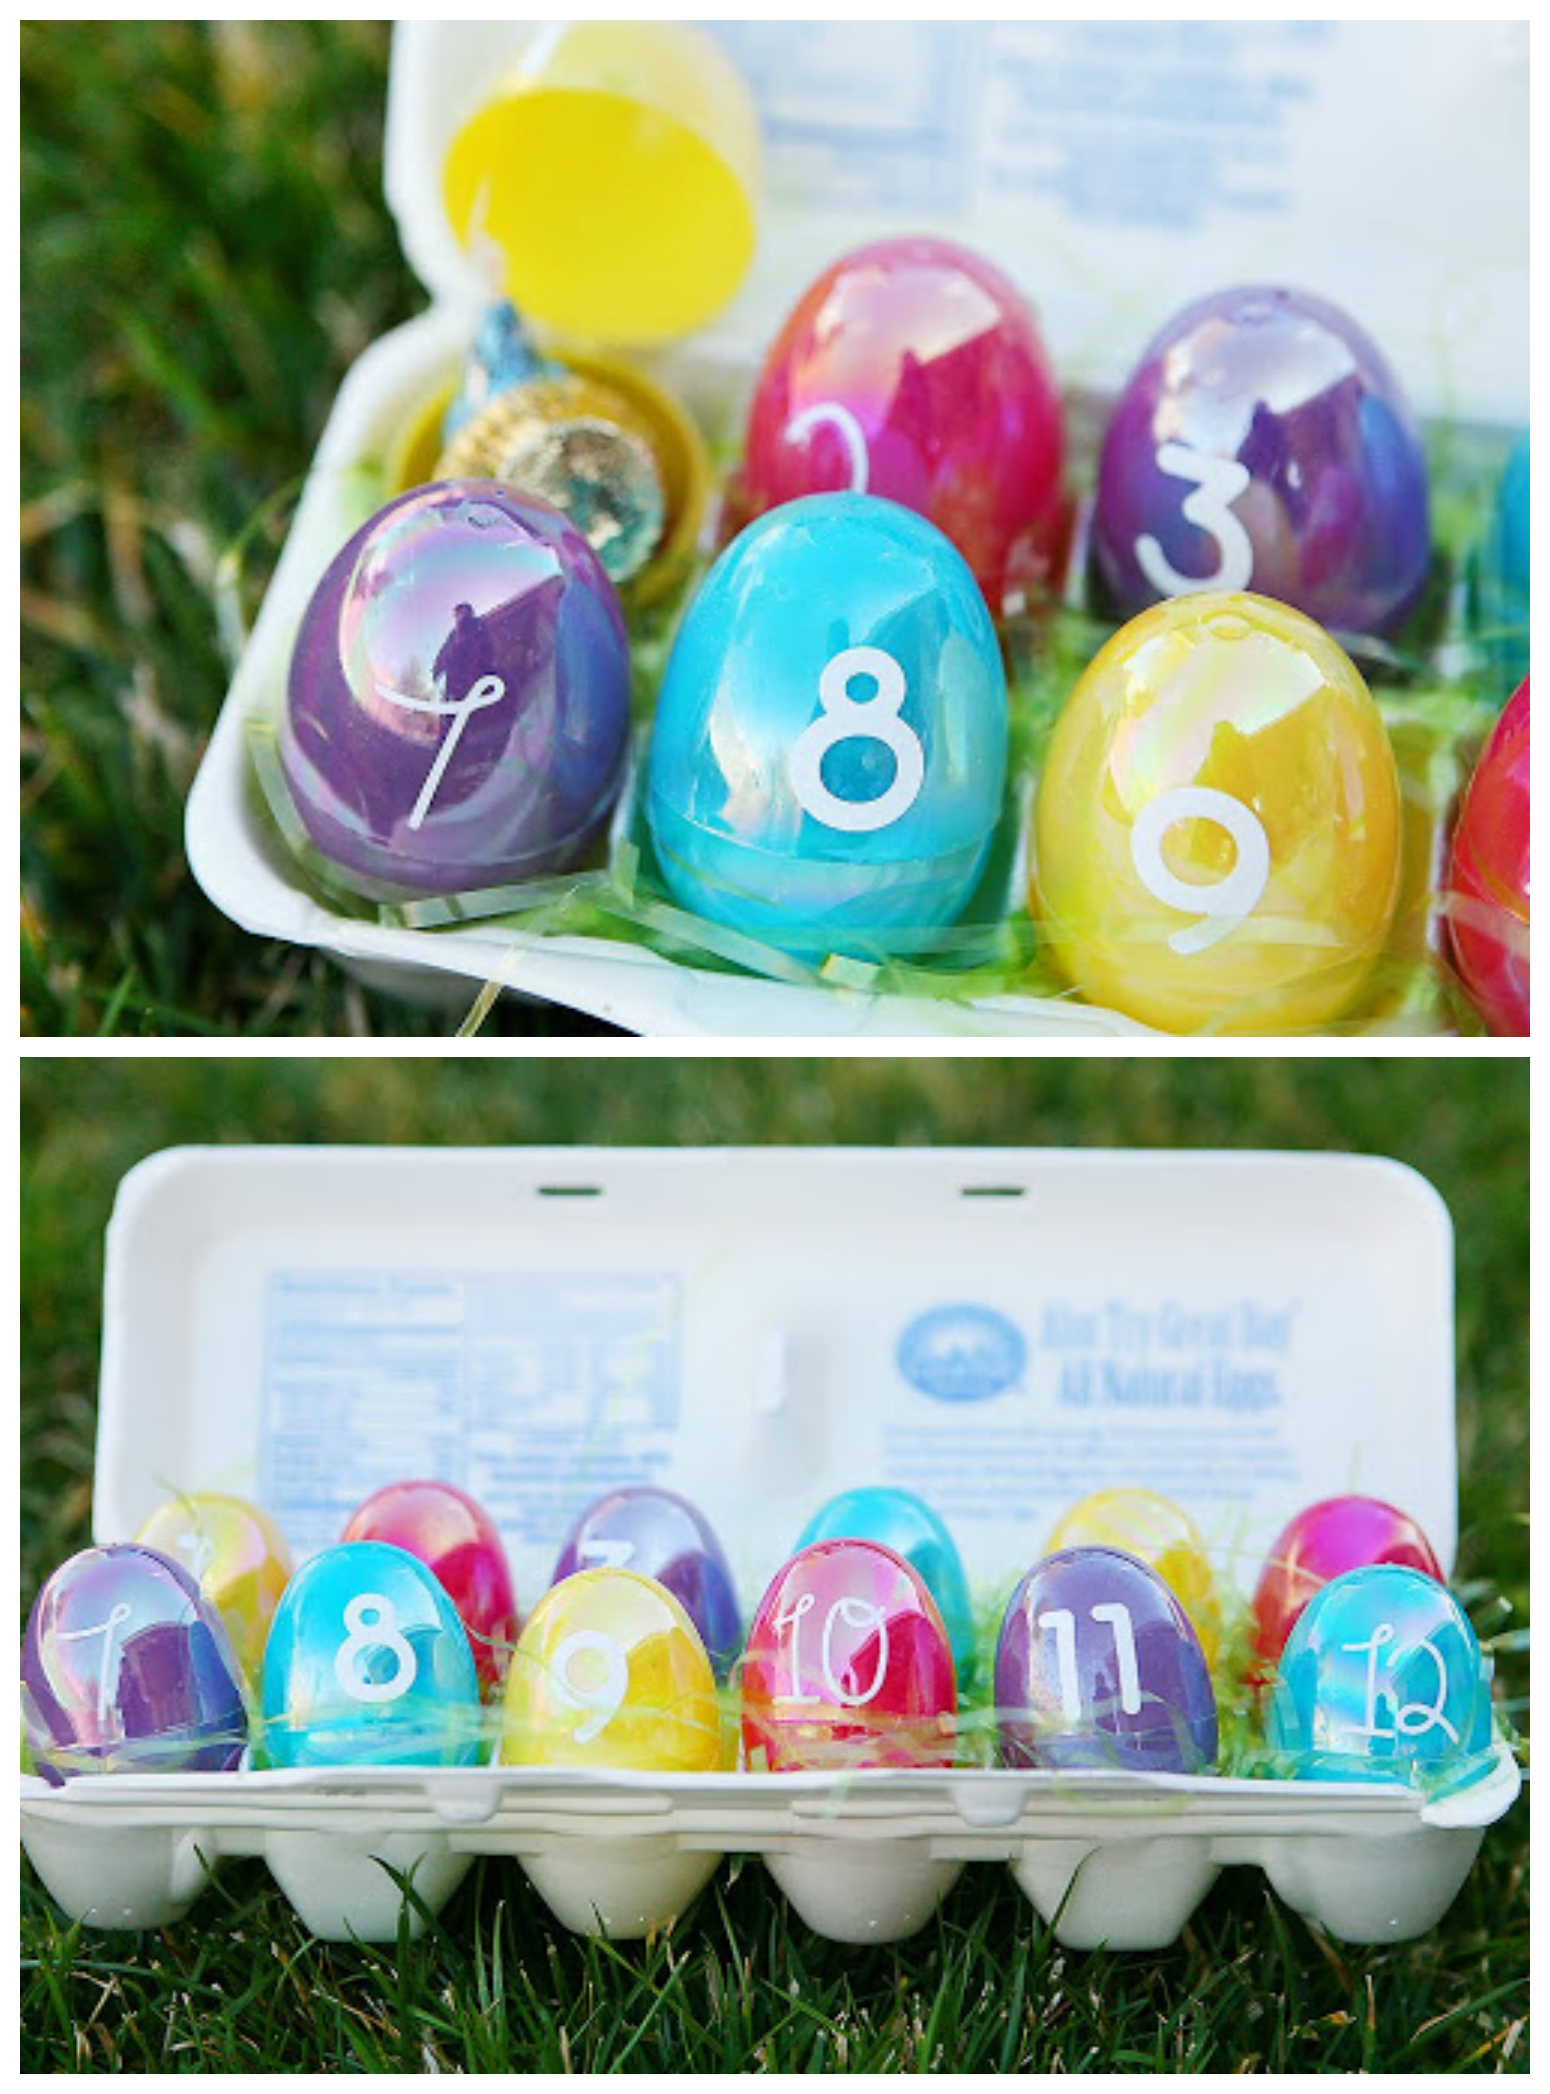 Countdown to Easter | So easy to make and the kids love opening an egg each day as they count down to Easter.